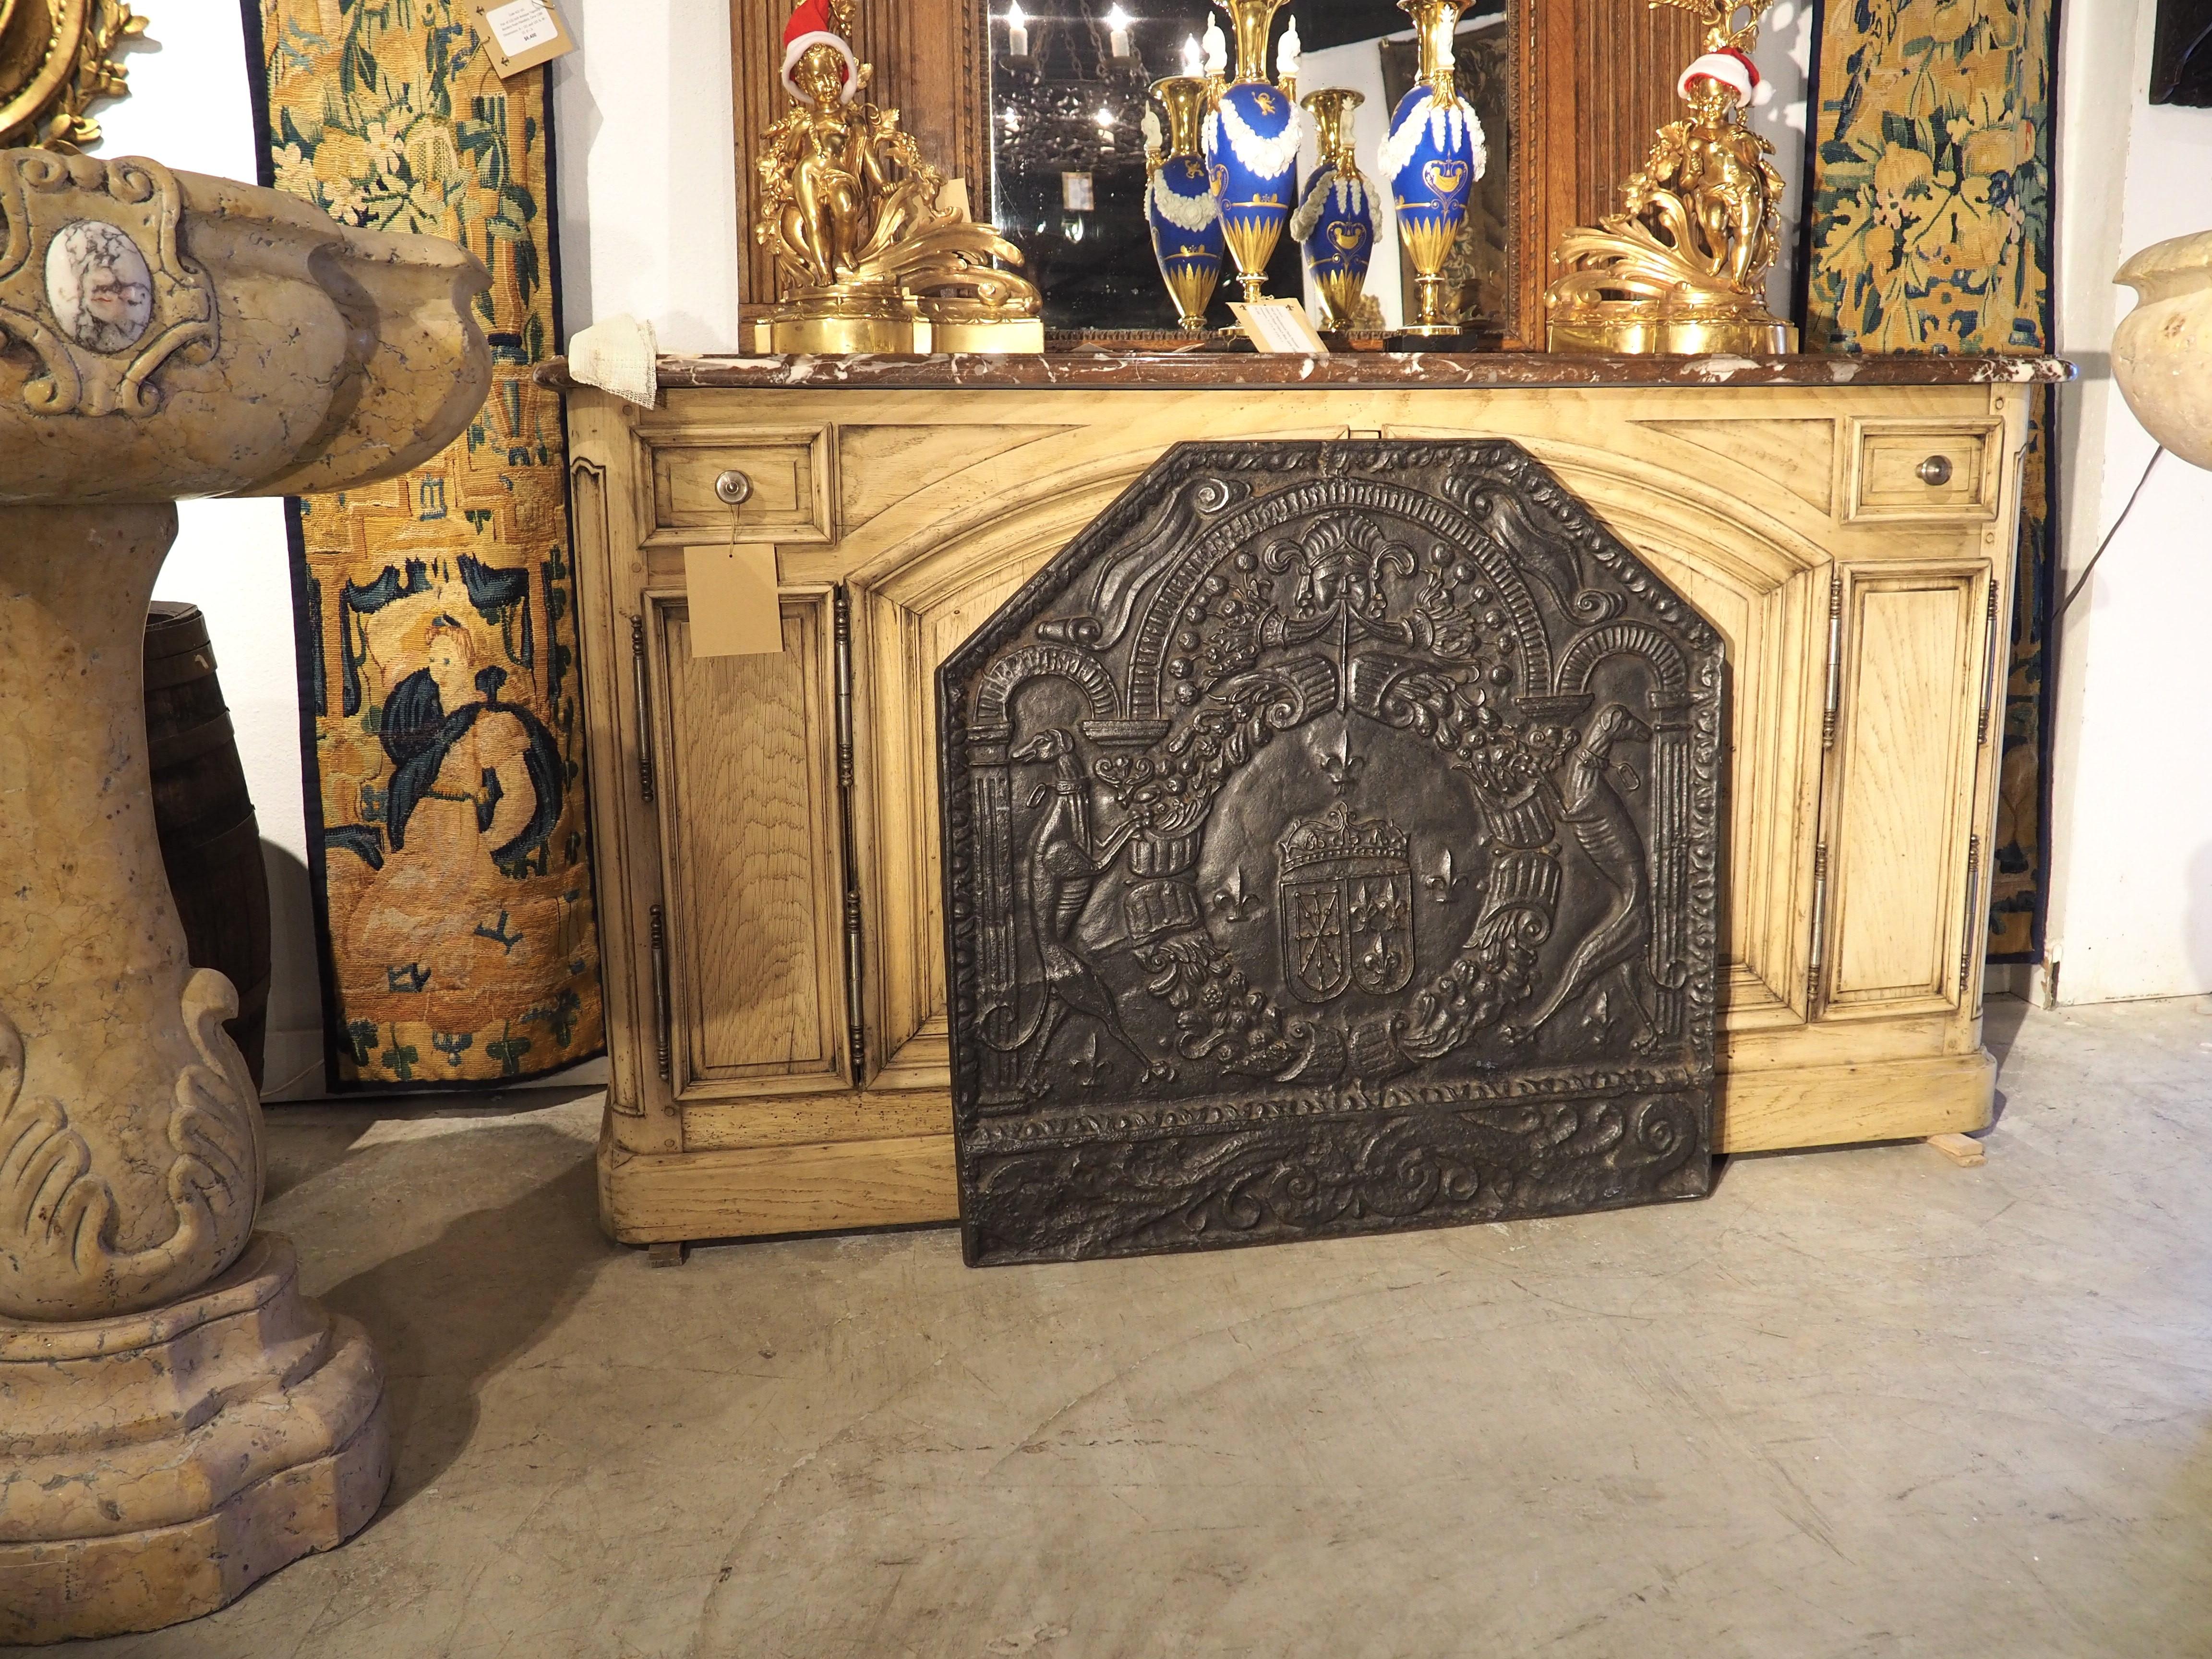 Crafted circa 1880, this cast iron fireback once graced the back of a fireplace in France. The rectangular fireback has an angular arched top with an egg and dart border along all edges. A central heraldic display depicts the arms of King Louis XIII